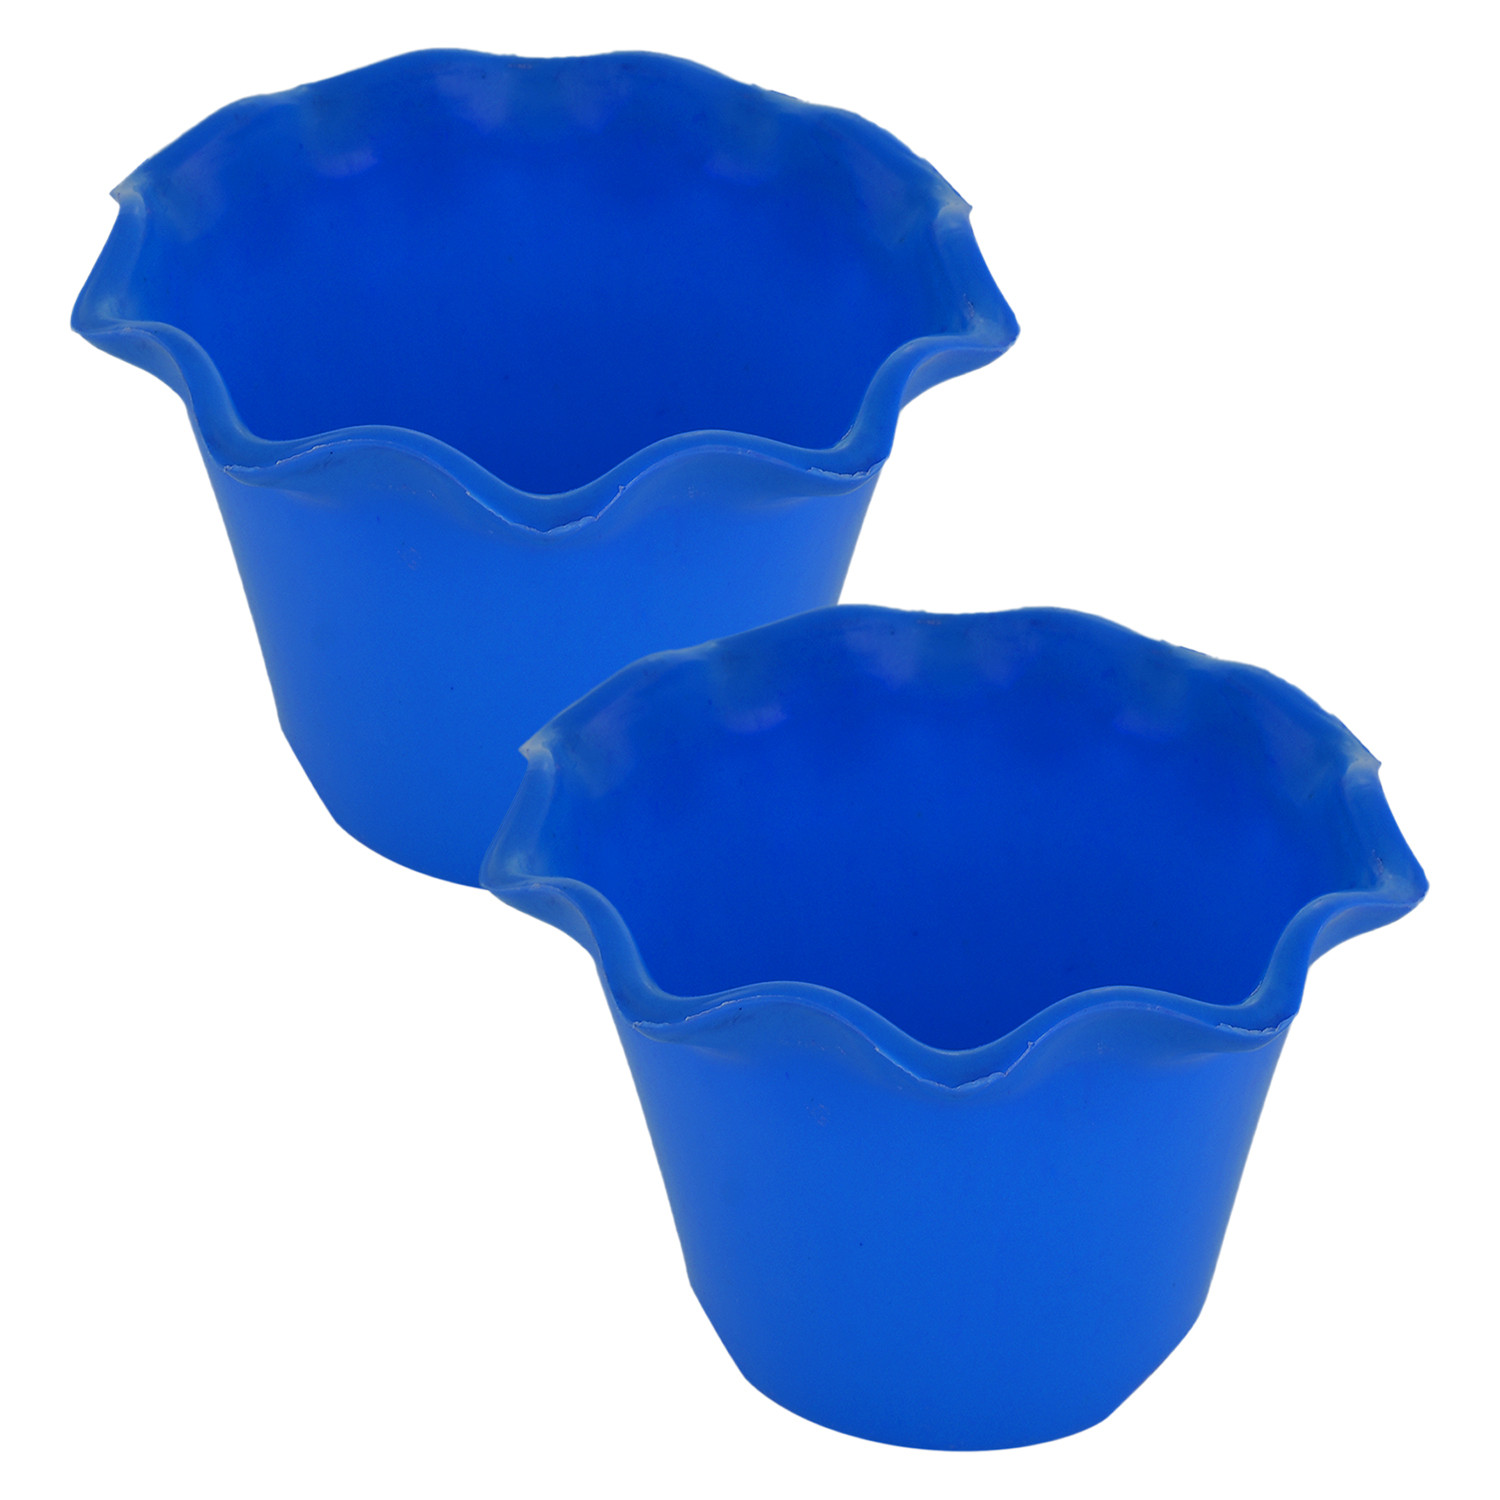 Kuber Industries Blossom Flower Pot|Durable Plastic Flower Pot|Gamla With Drain Holes for Home Décor|Balcony|Garden|8 Inch (Blue)